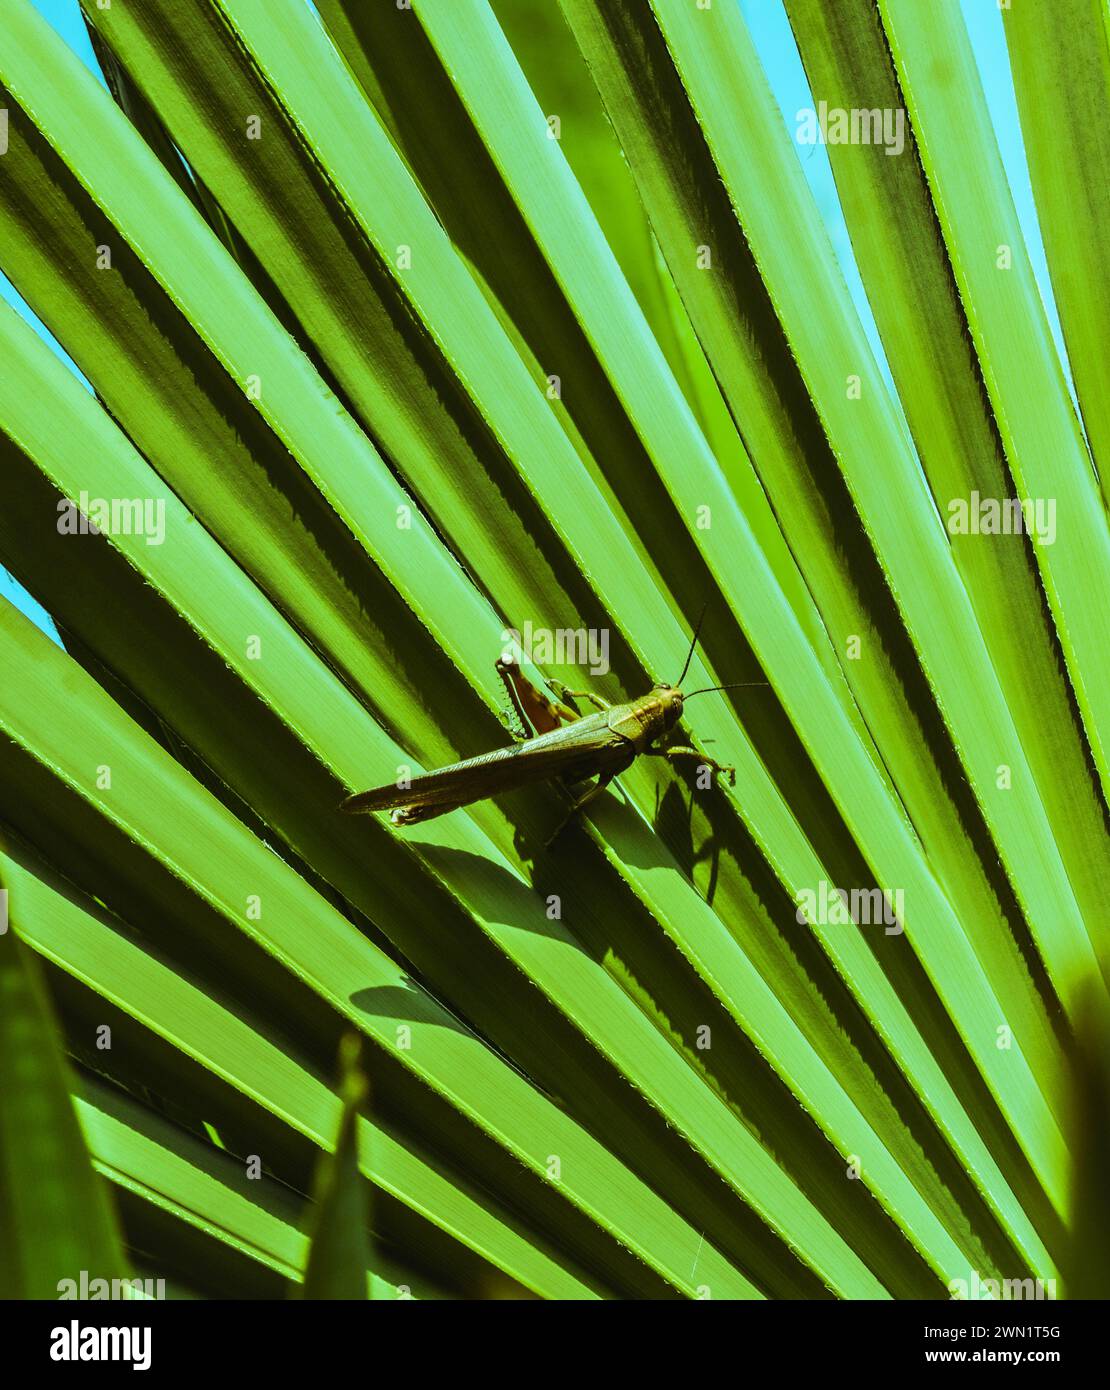 Green cricket: the intriguing climb on the palm leaf Stock Photo